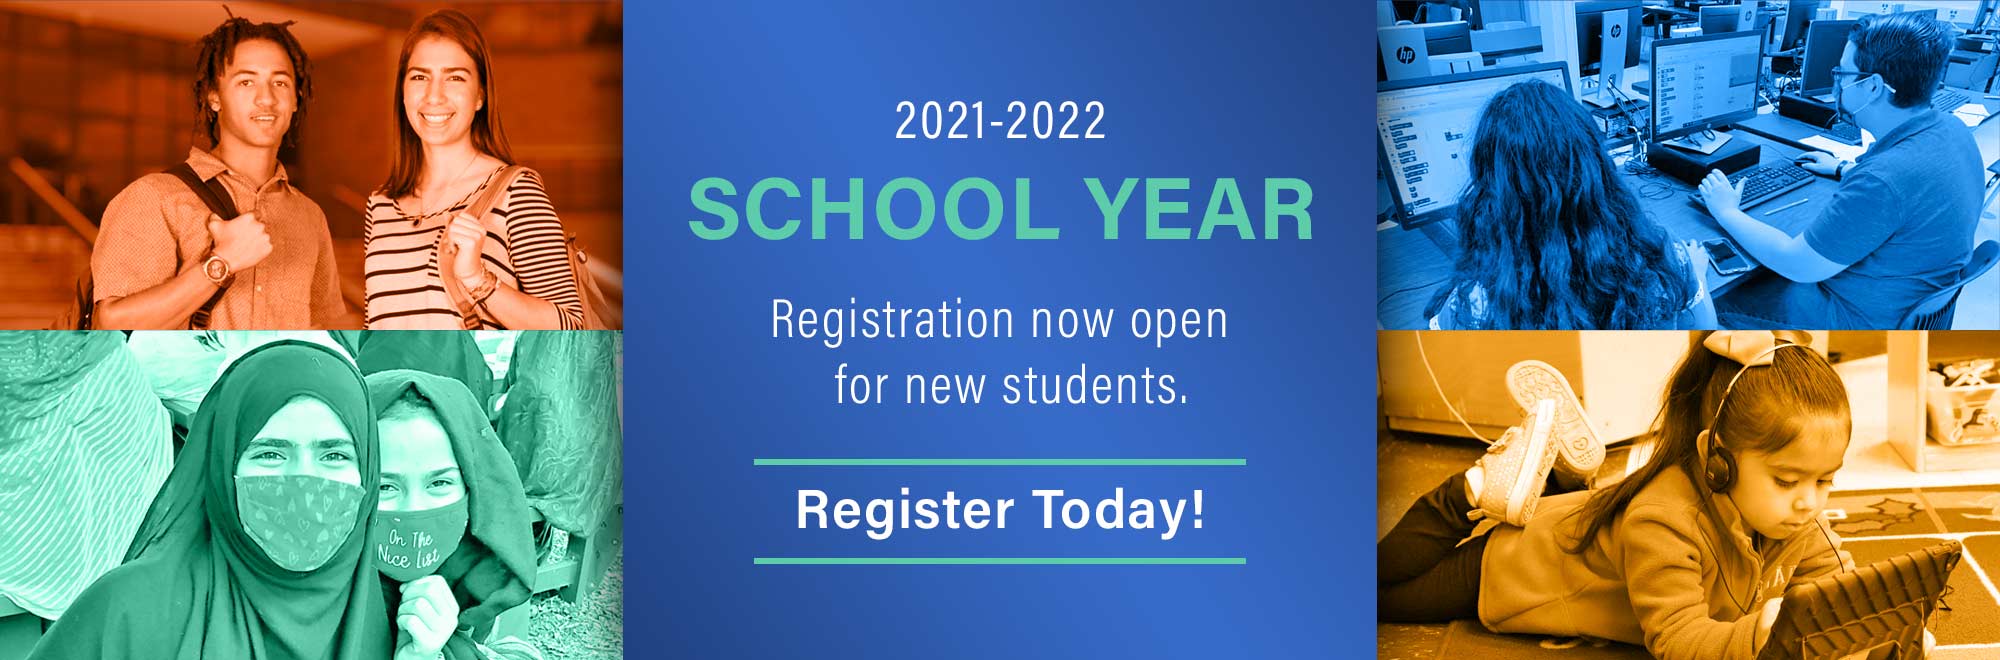 2021-2022 School Year Registration Now Open for New Students. Register Today!